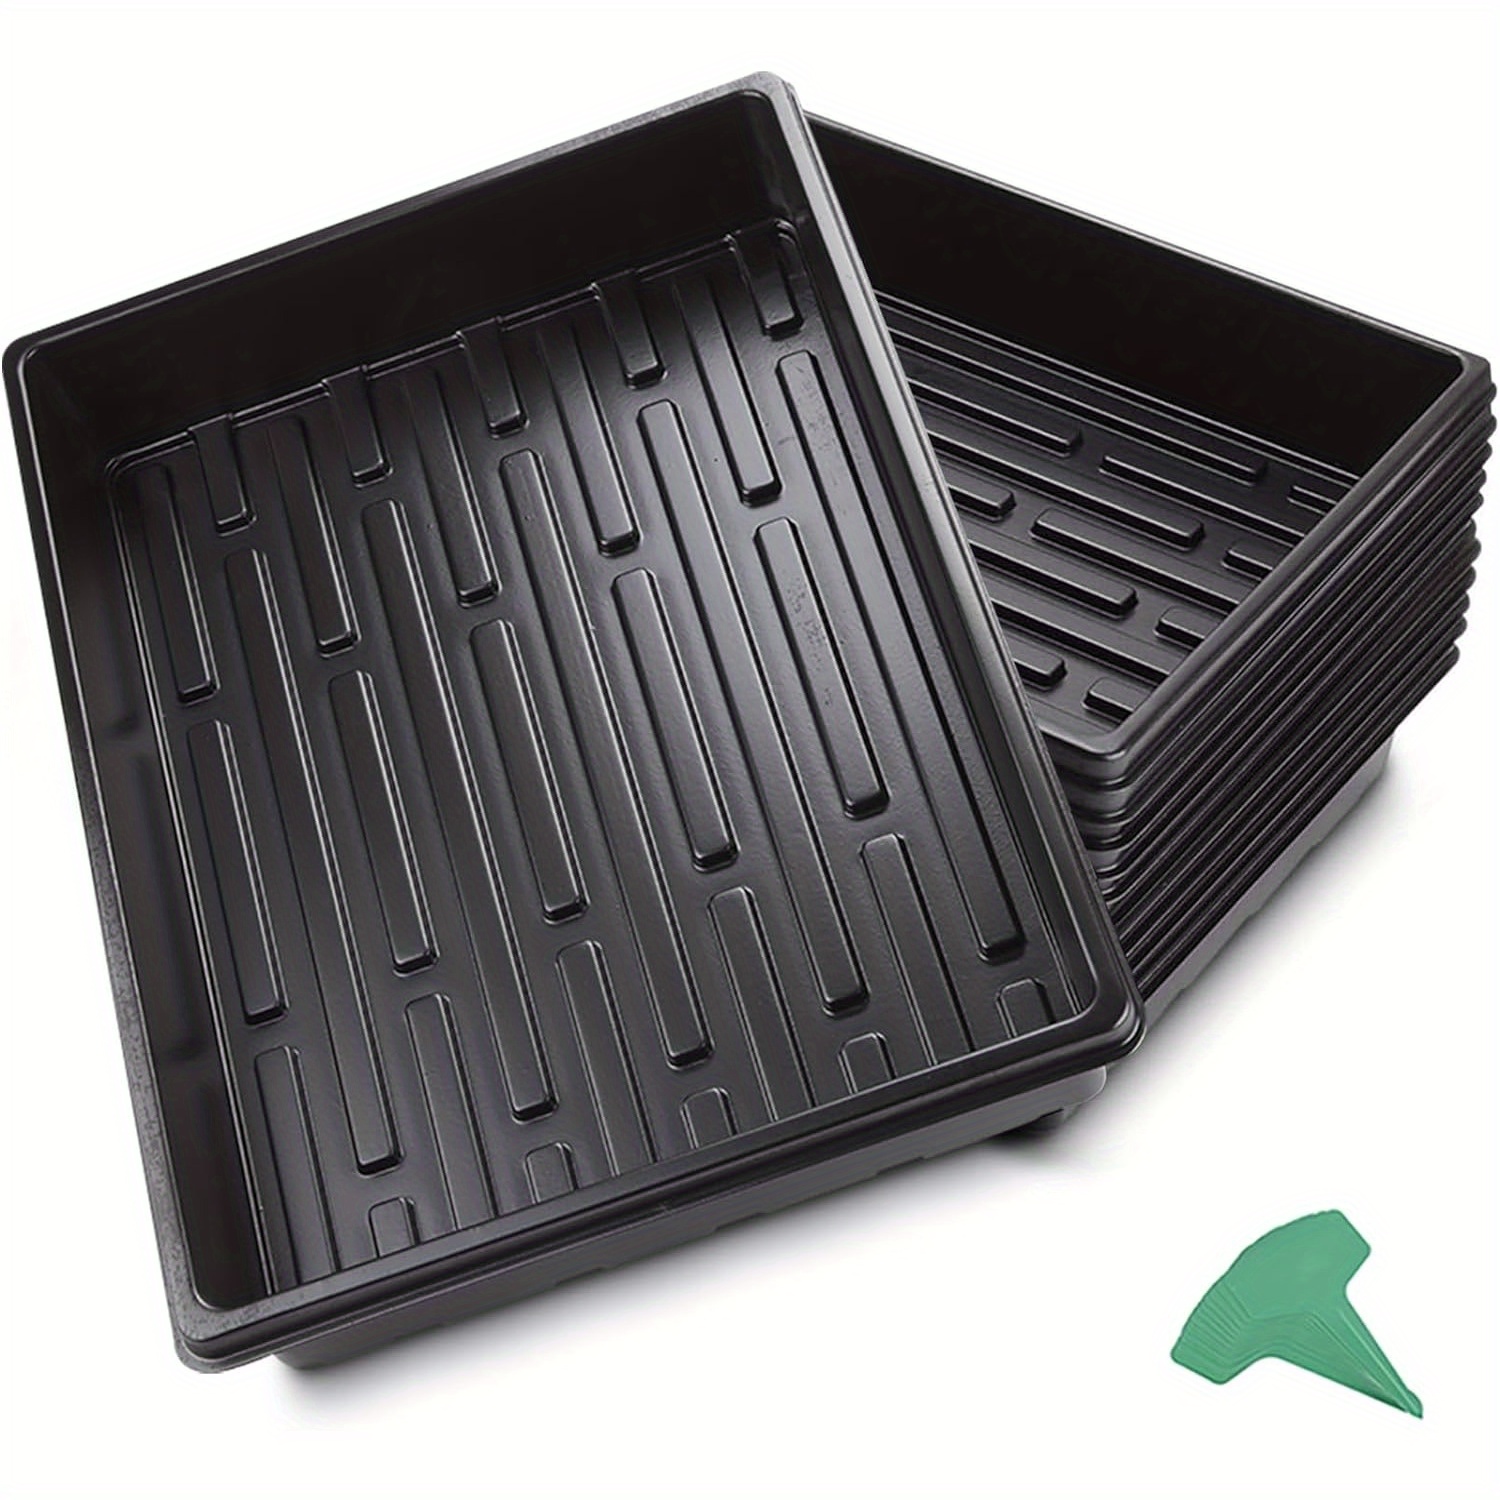 

12 Packs 15 X 11 X 2.6 Inch Plastic Growing Trays With 15 Pcs Plant Labels, Seed Planting Tray Seedling Starter For Greenhouse Hydroponics Seedlings Plant Germination